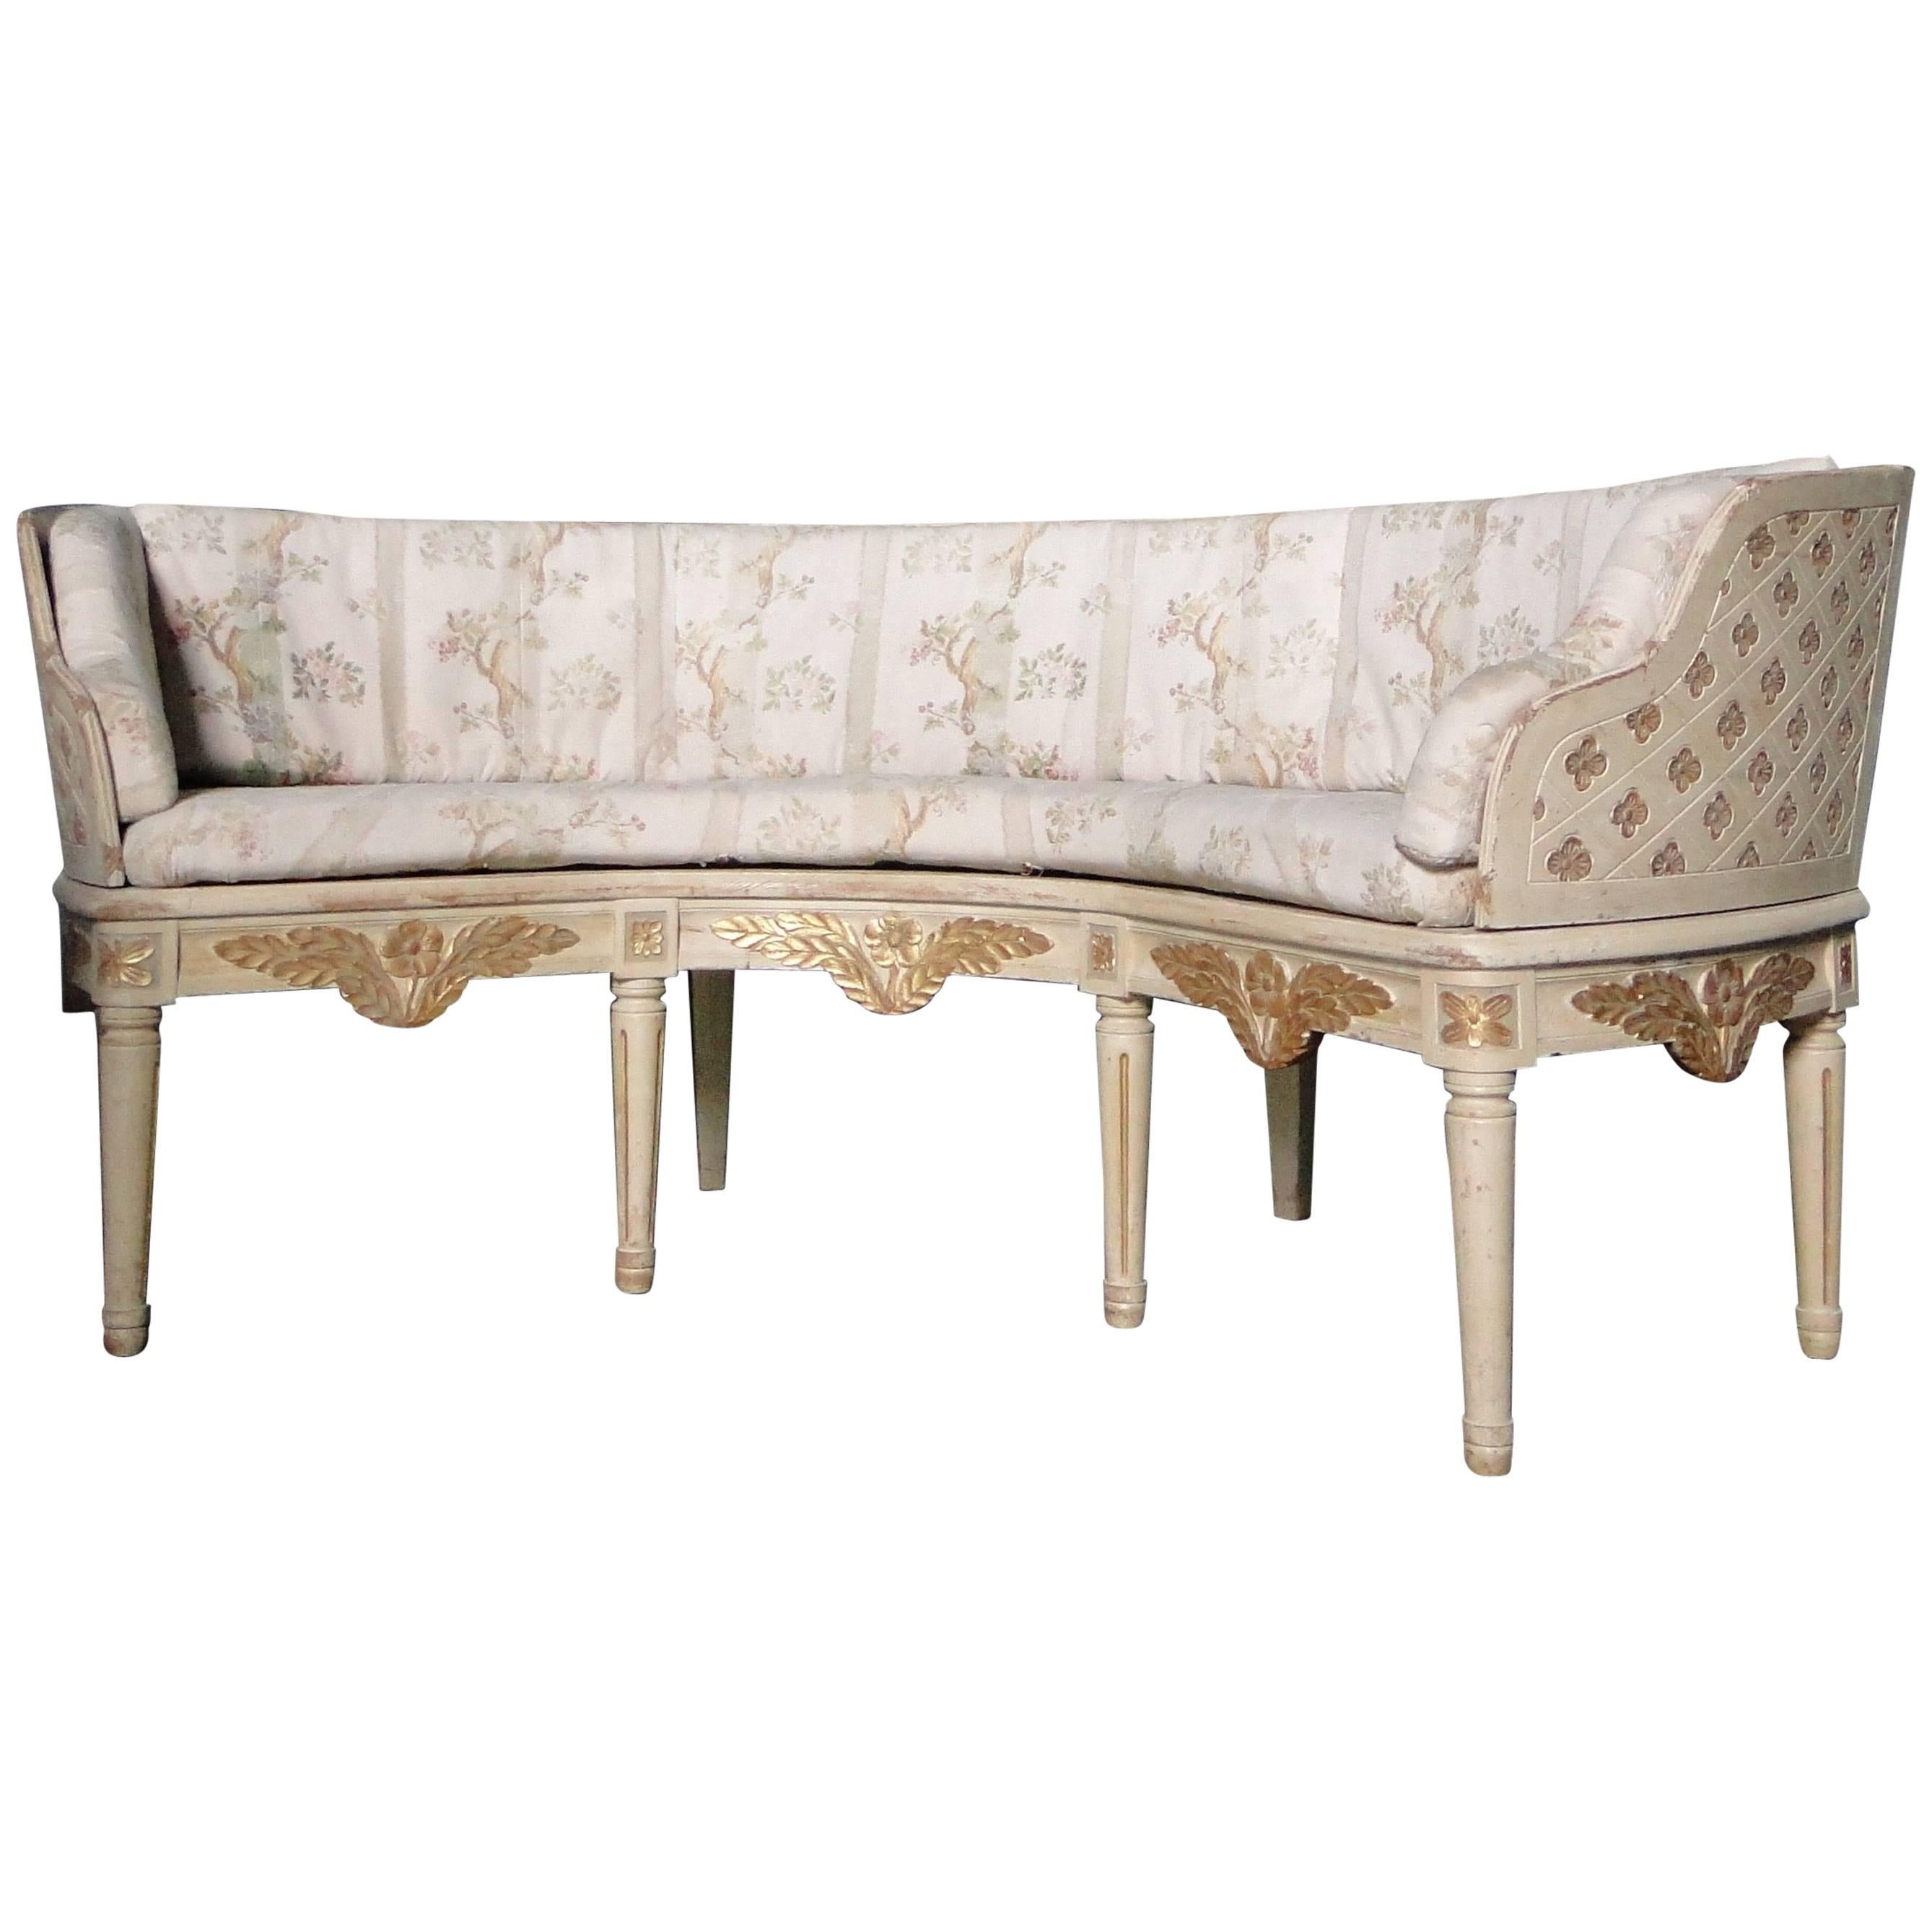 Swedish Gustavian Style Curved Sofa Beginning, 1900 For Sale